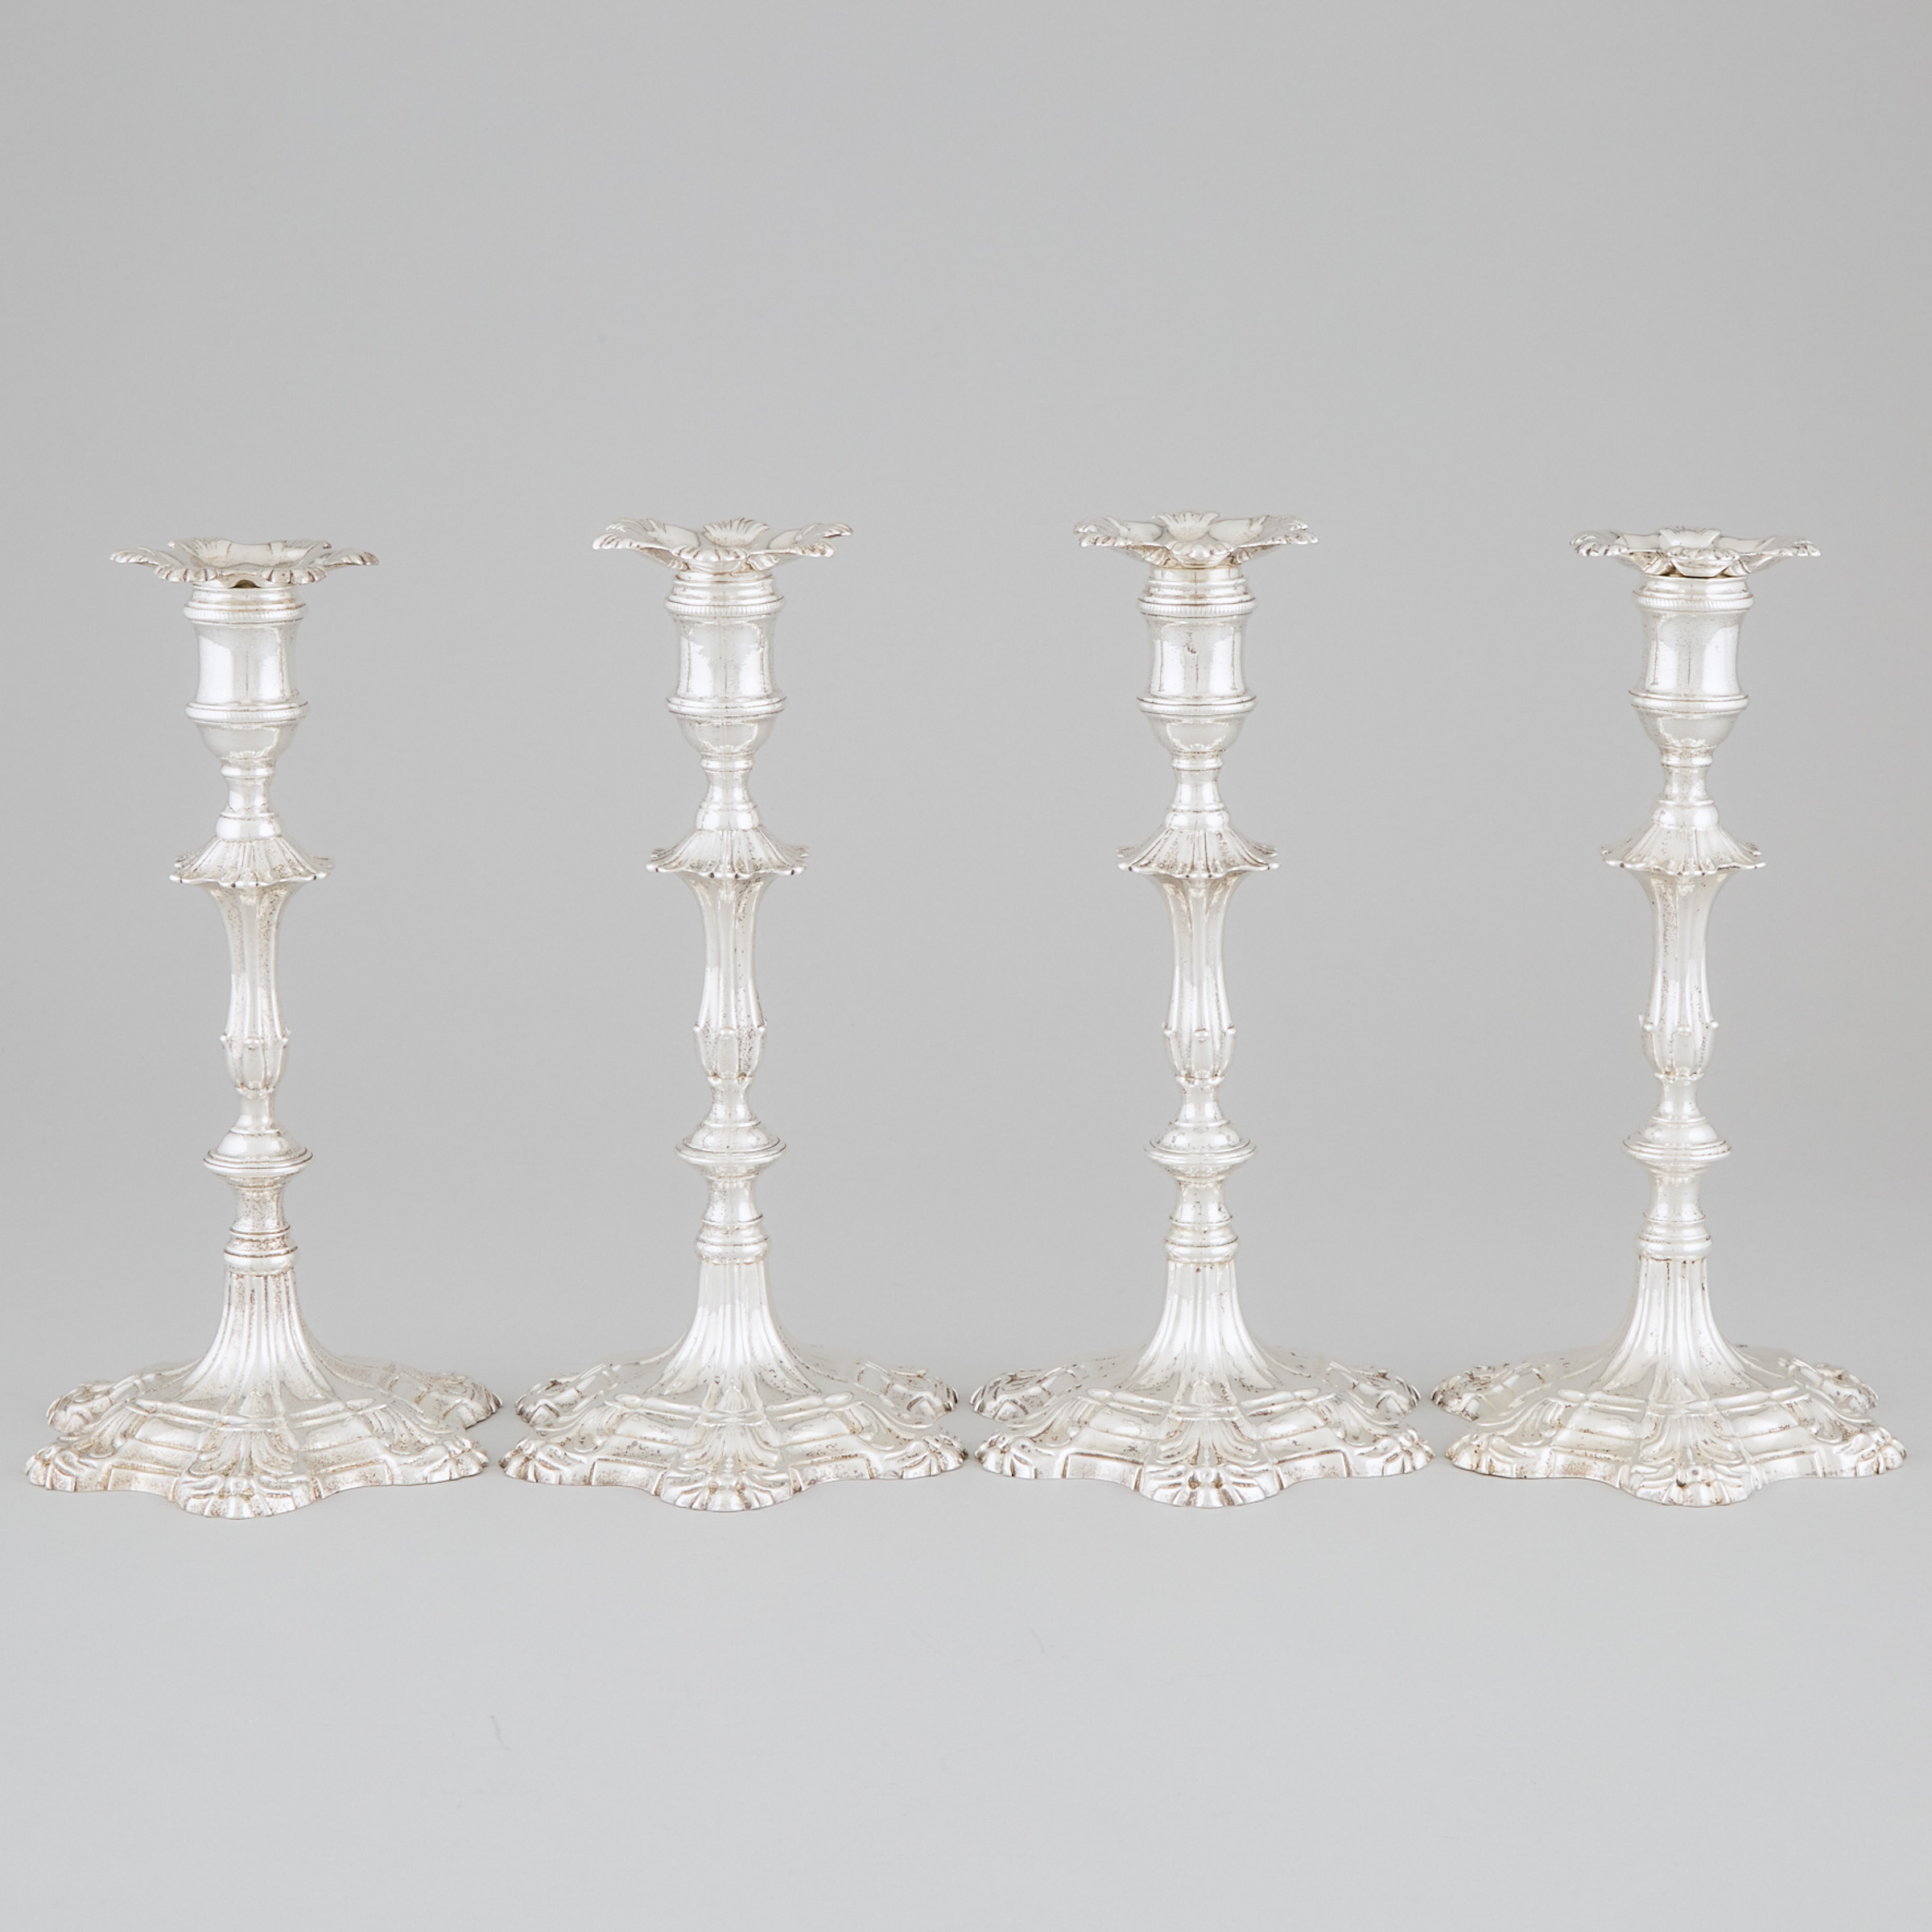 Set of Four George II Silver Table Candlesticks, William Cafe, London, 1759